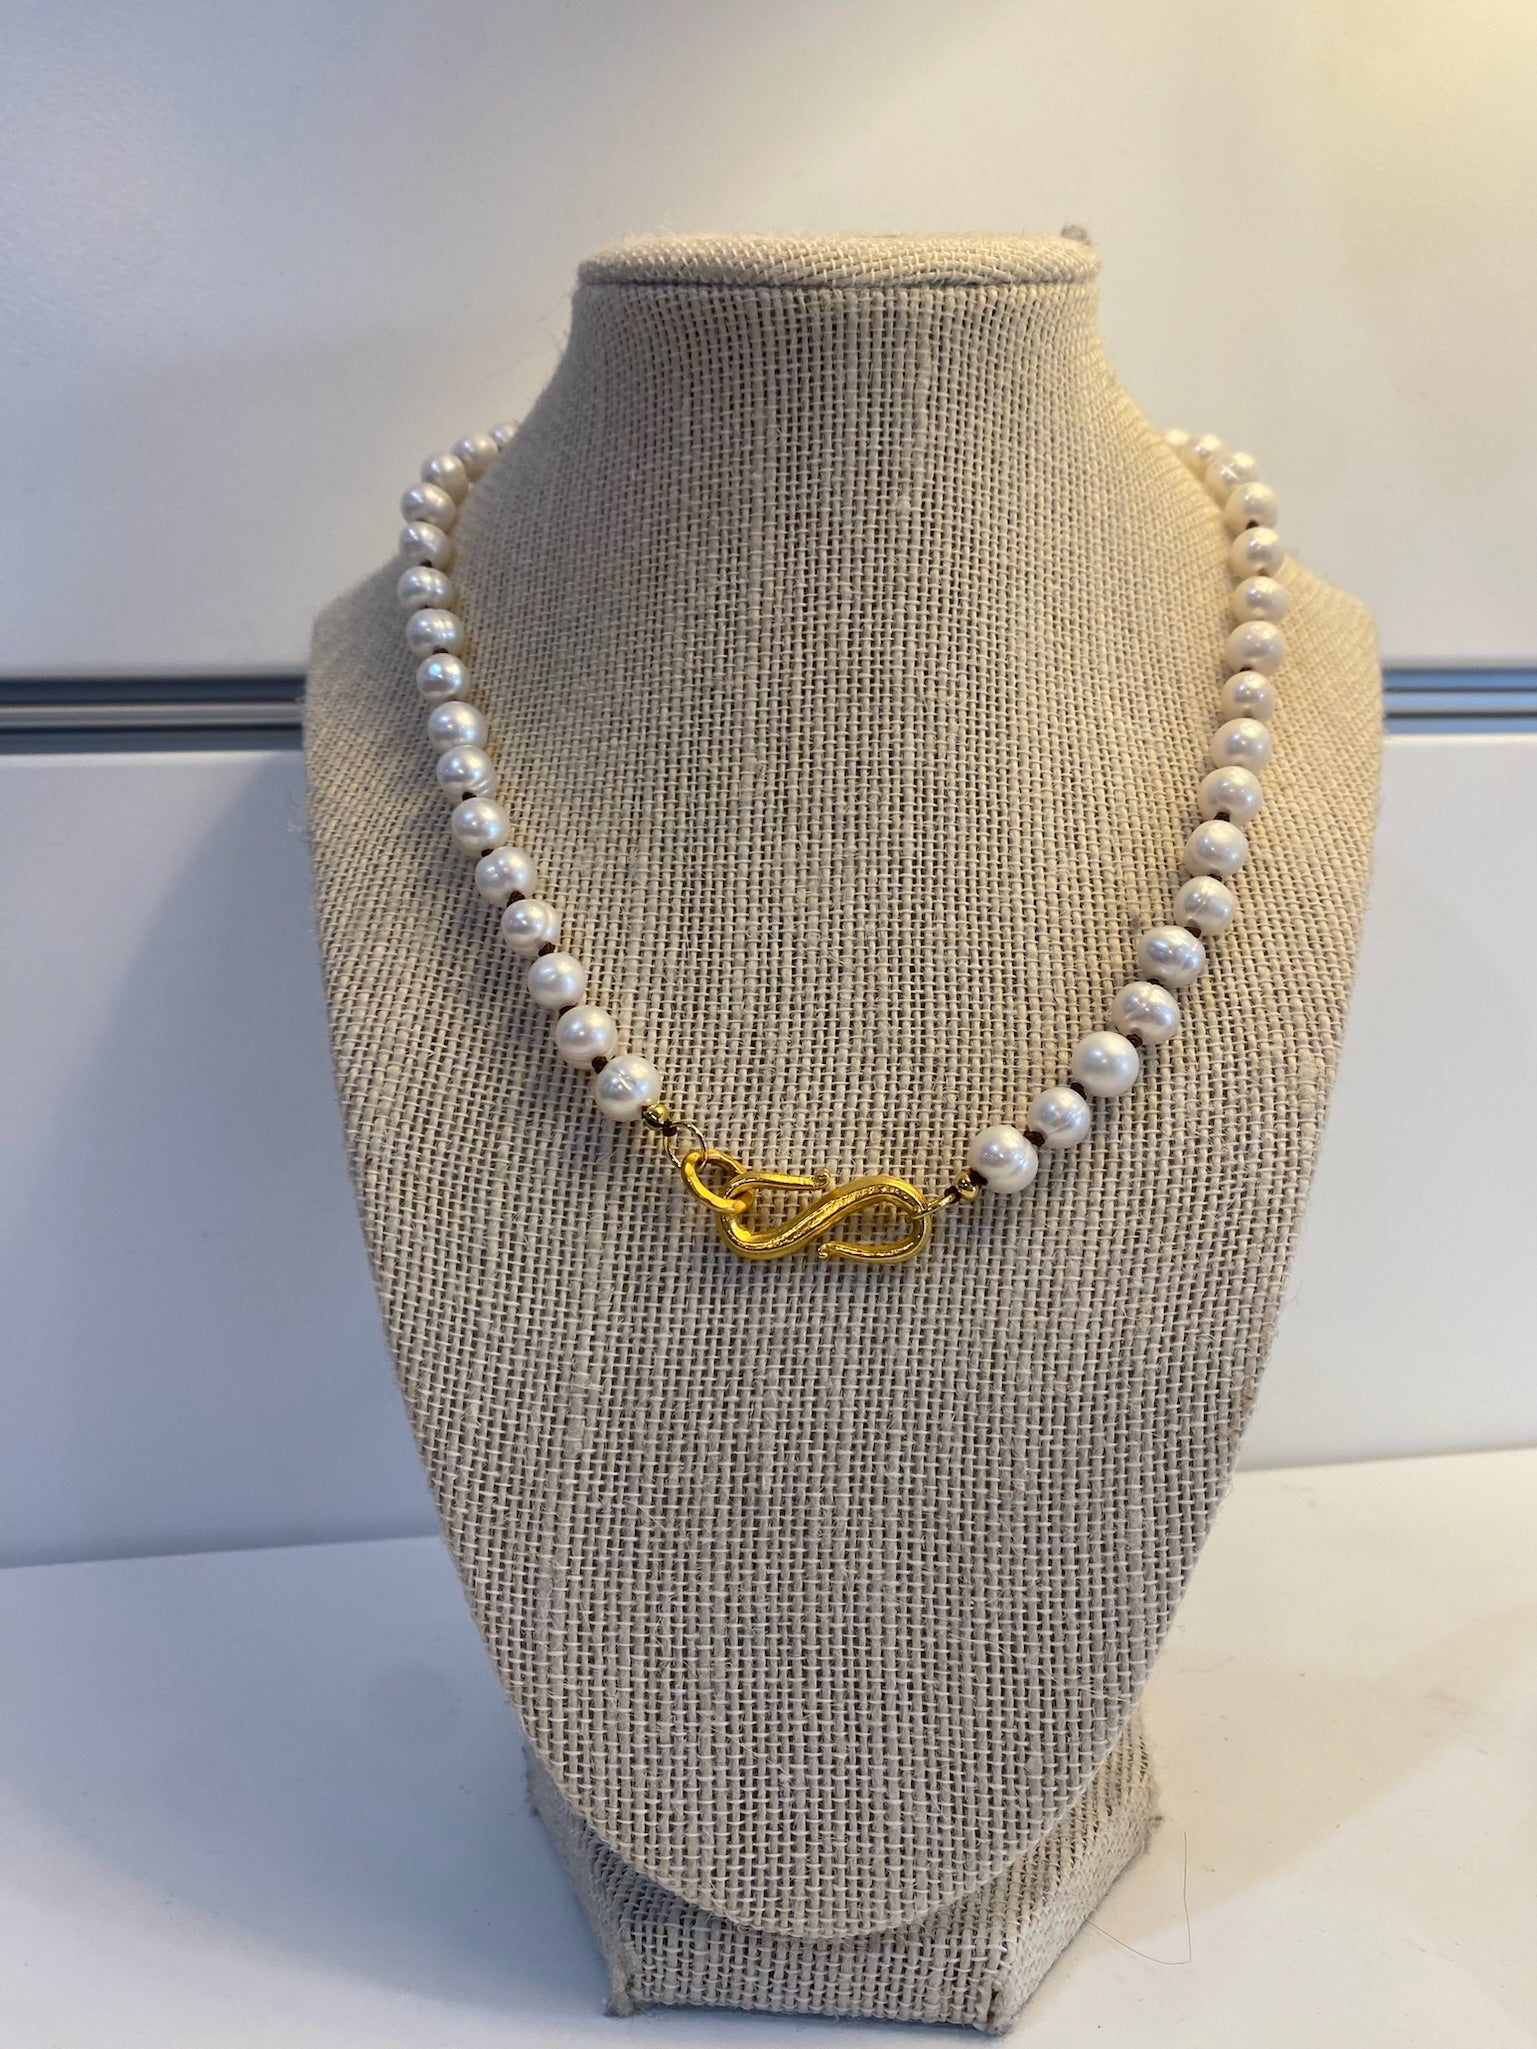 Hand knotted freshwater pearl necklace with S clasp